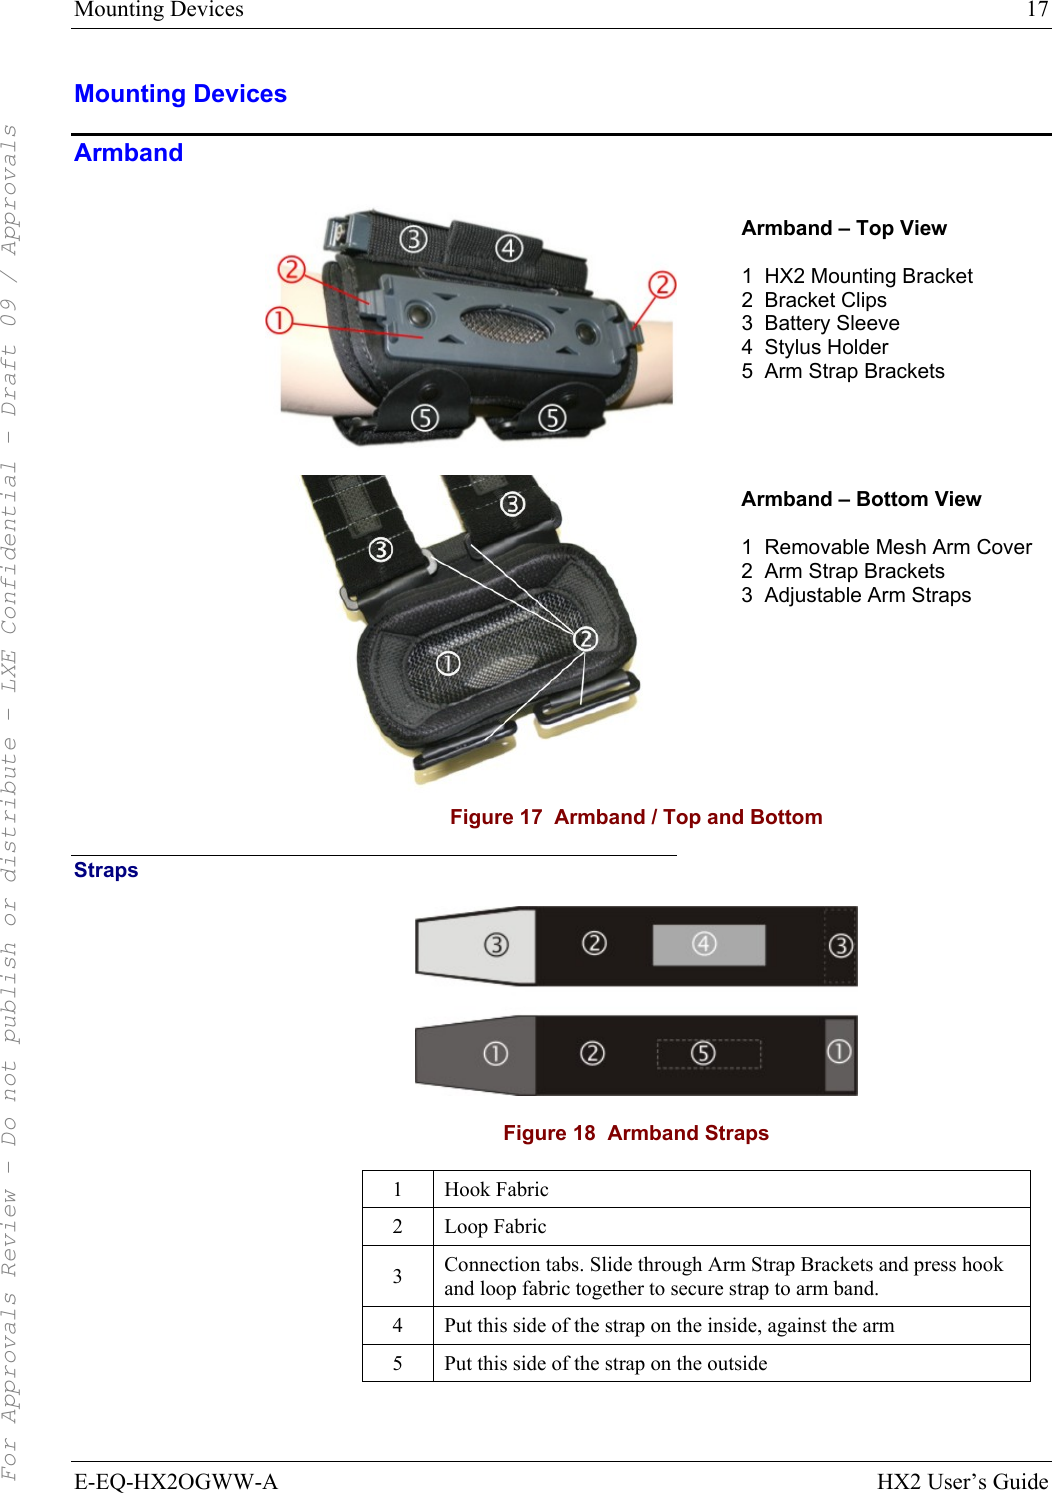 Mounting Devices  17 E-EQ-HX2OGWW-A HX2 User’s Guide Mounting Devices Armband   Armband – Top View  1  HX2 Mounting Bracket 2  Bracket Clips 3  Battery Sleeve 4  Stylus Holder 5  Arm Strap Brackets   Armband – Bottom View  1  Removable Mesh Arm Cover 2  Arm Strap Brackets 3  Adjustable Arm Straps  Figure 17  Armband / Top and Bottom Straps  Figure 18  Armband Straps 1 Hook Fabric 2 Loop Fabric 3  Connection tabs. Slide through Arm Strap Brackets and press hook and loop fabric together to secure strap to arm band.  4  Put this side of the strap on the inside, against the arm 5  Put this side of the strap on the outside  For Approvals Review - Do not publish or distribute - LXE Confidential - Draft 09 / Approvals